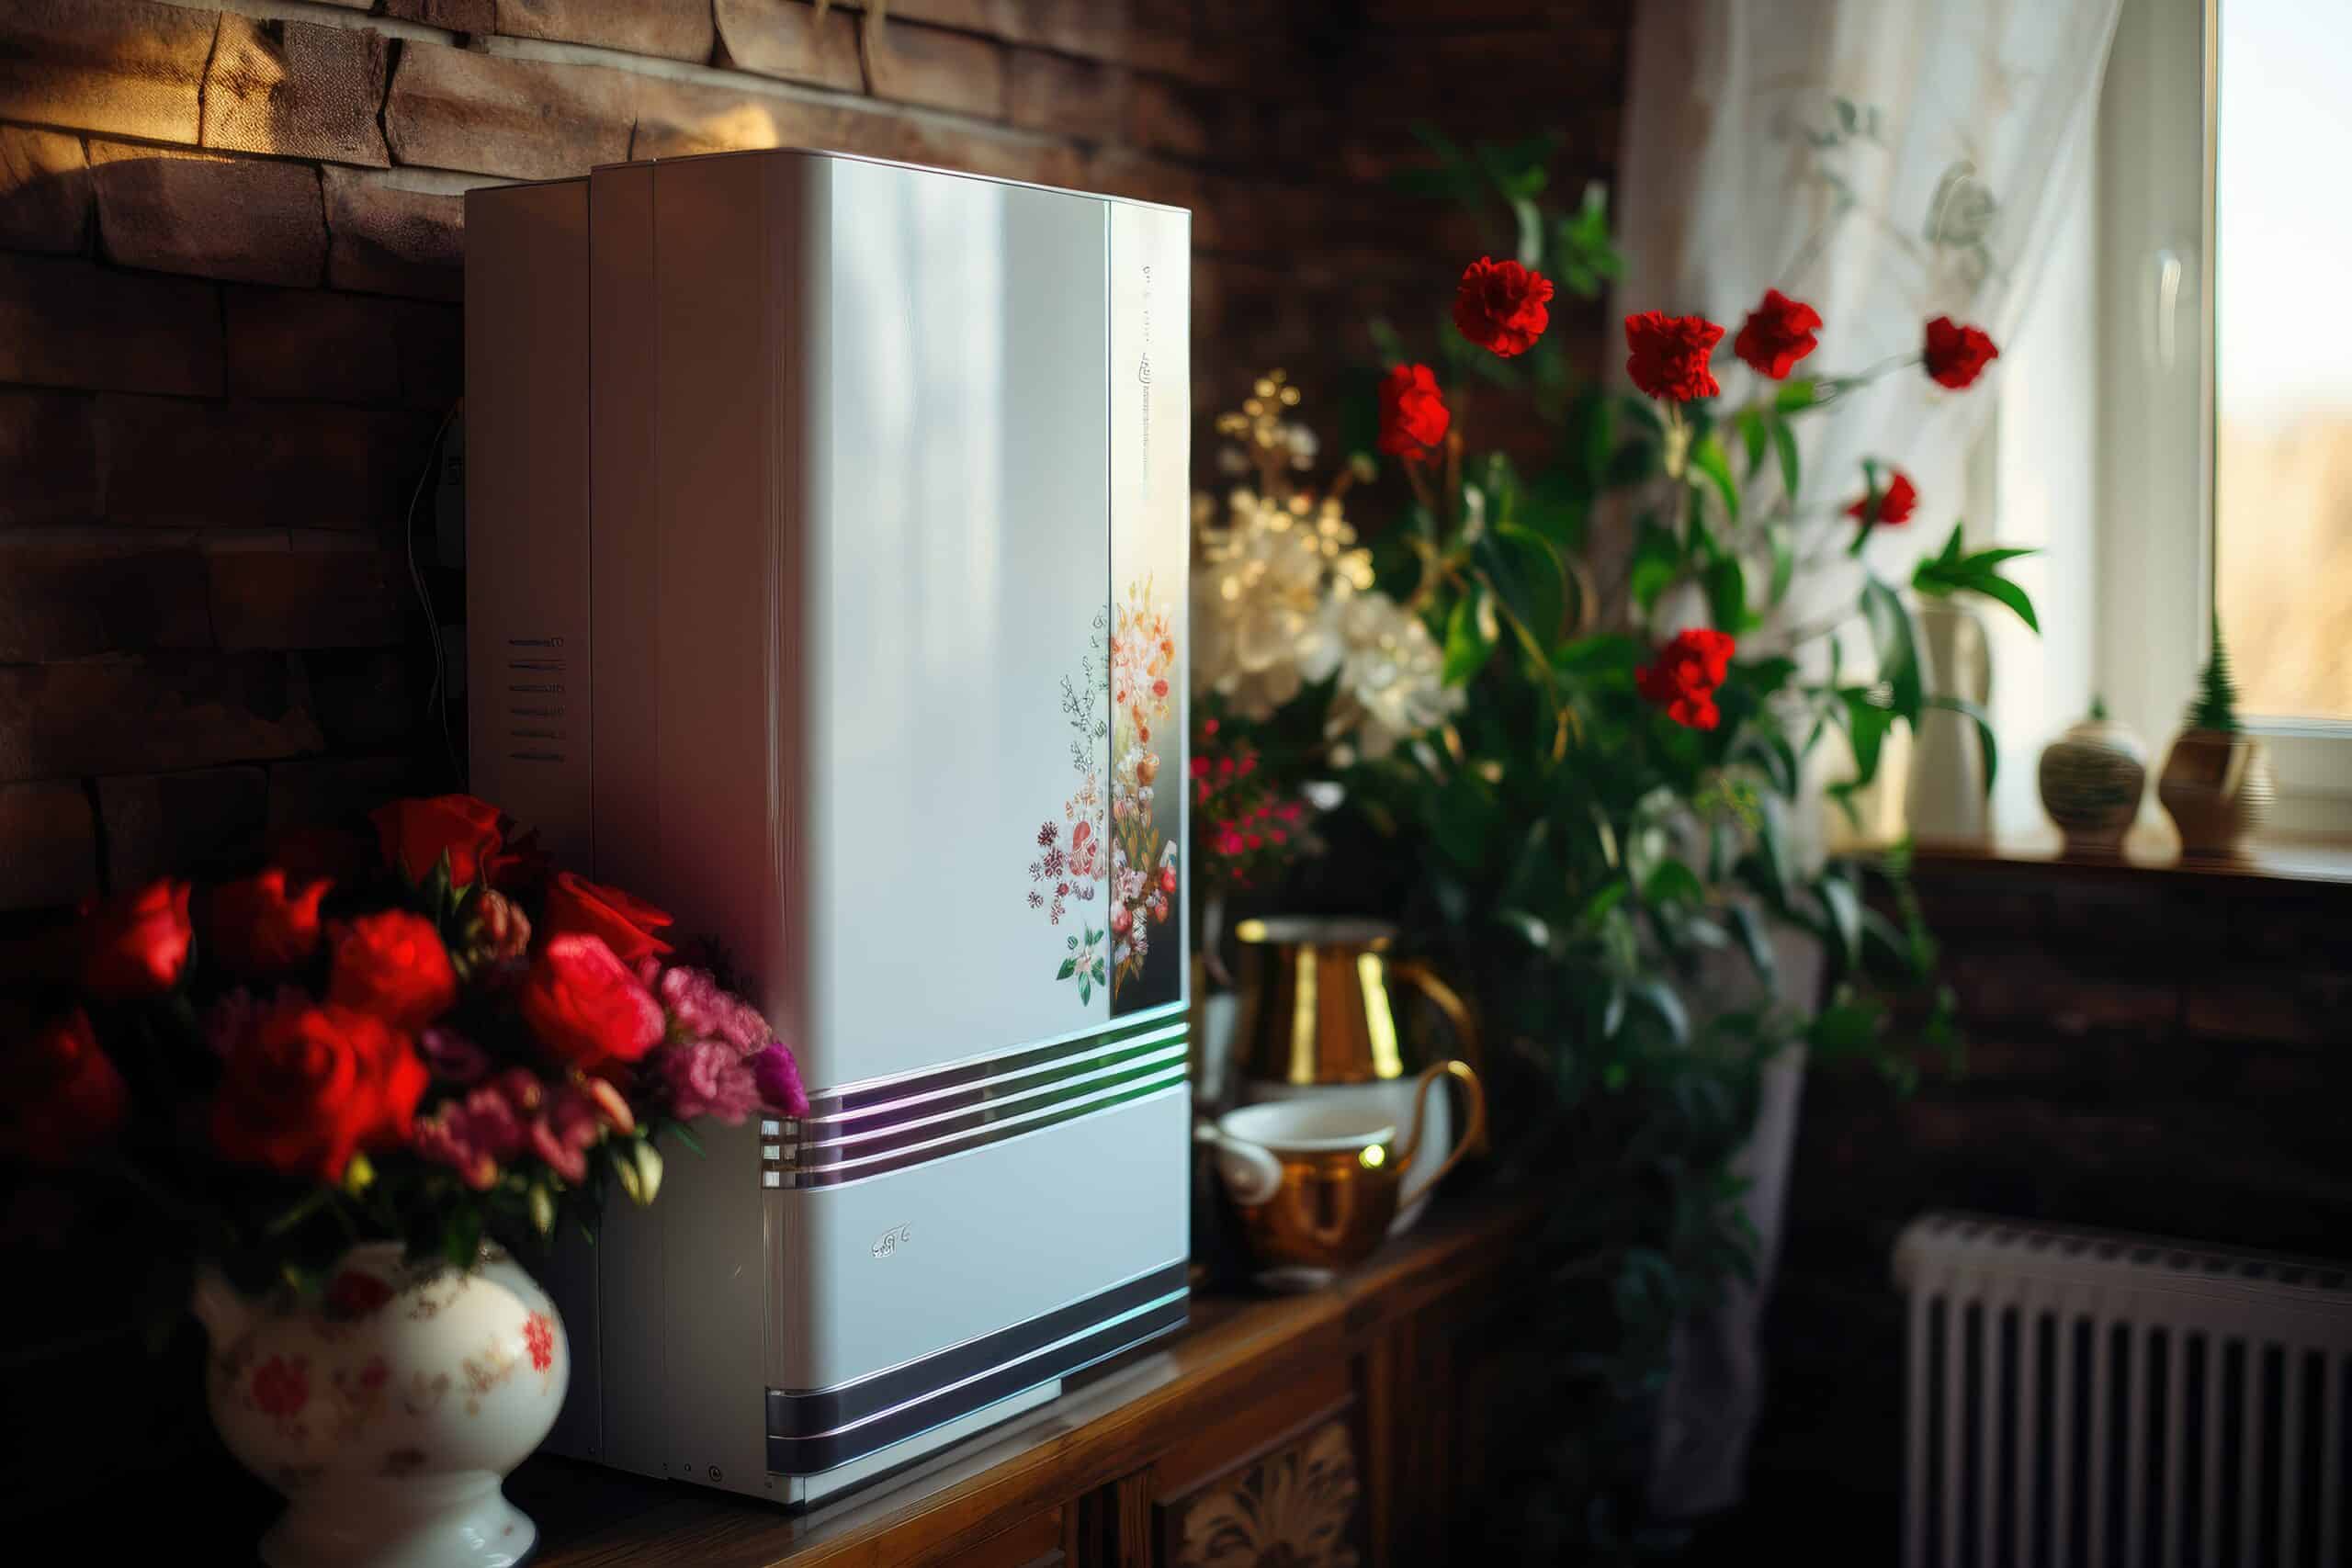 www.appr.com : Can an air purifier be used in conjunction with other HVAC systems like a furnace or air conditioner?